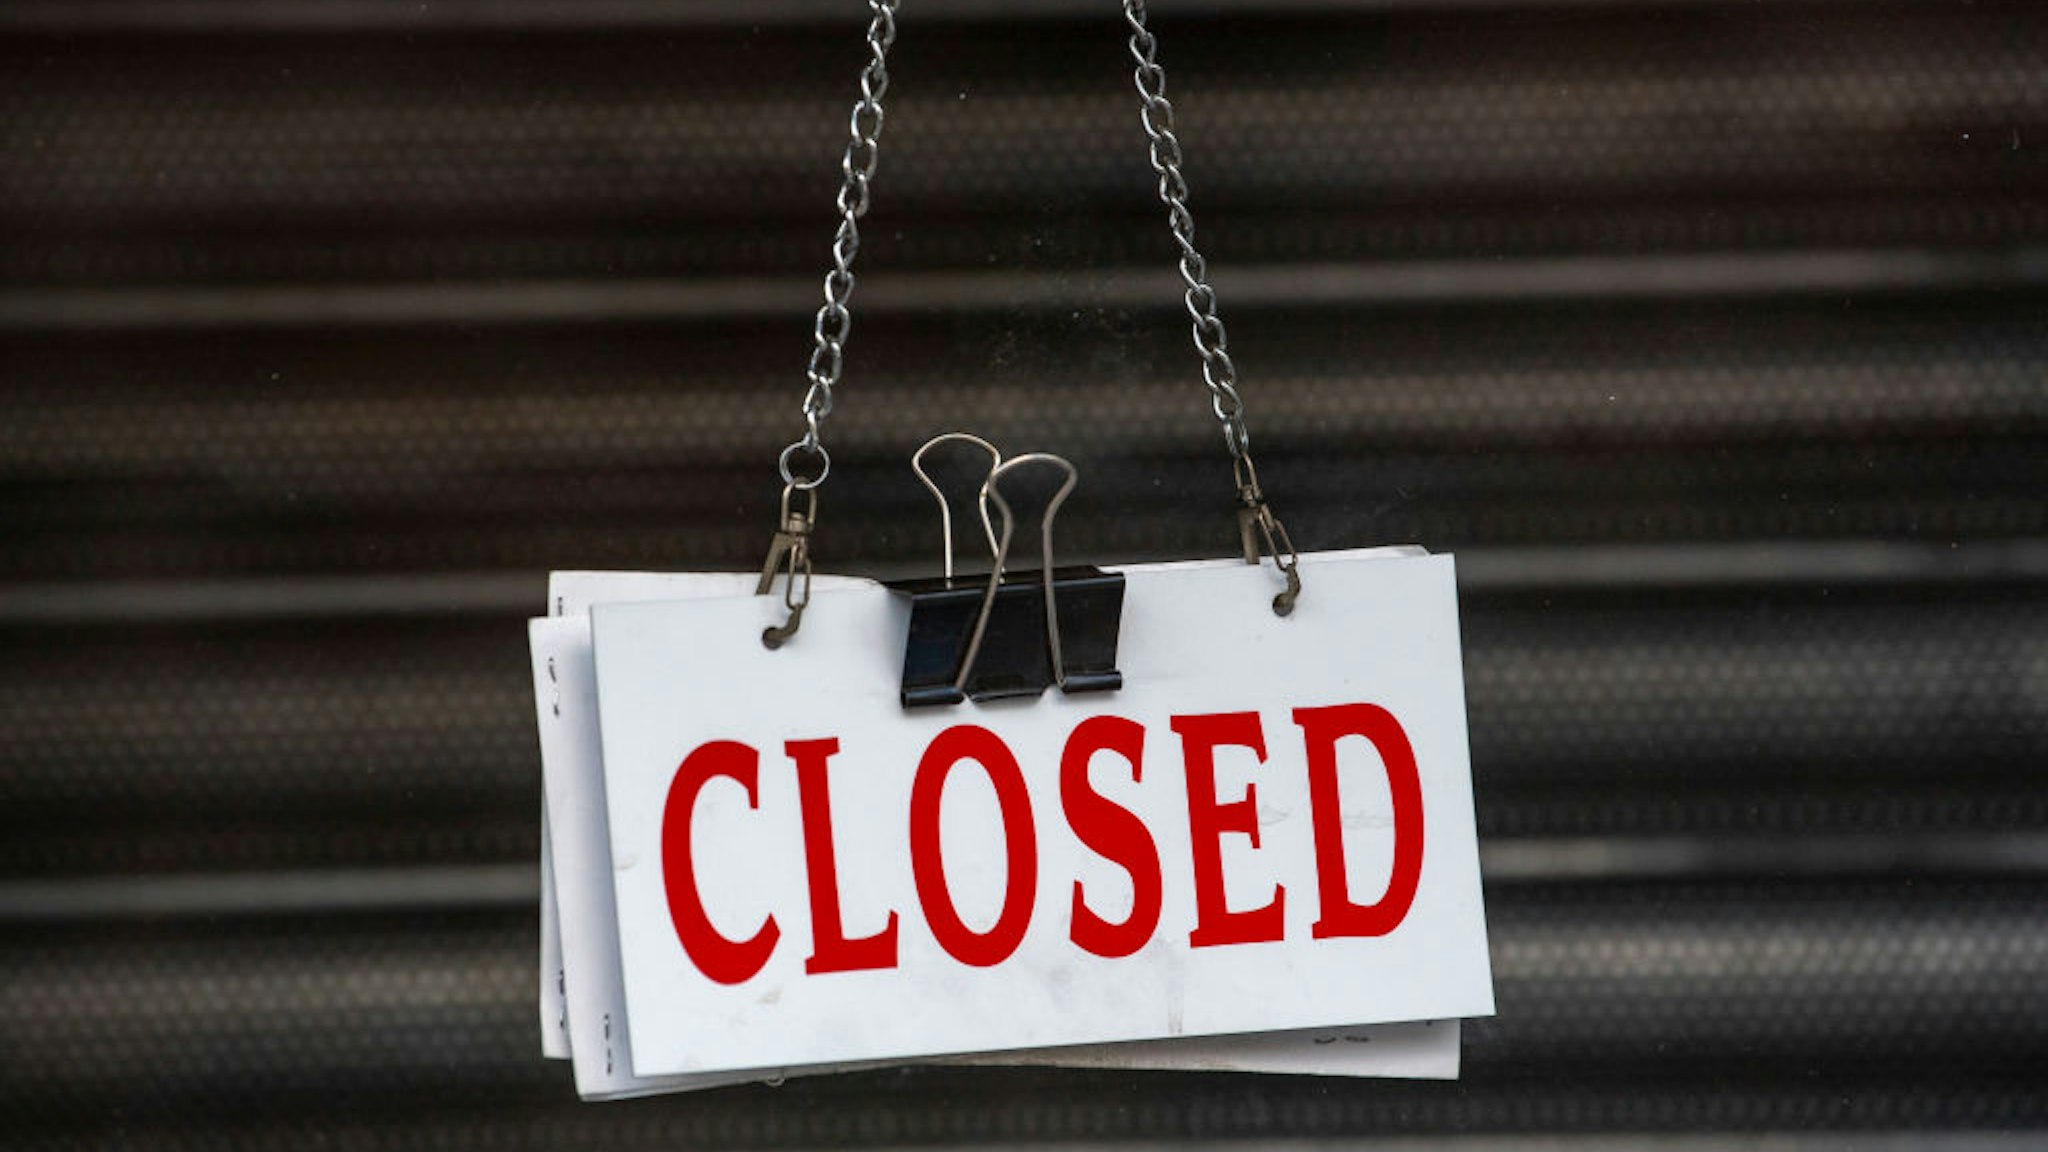 CARDIFF, UNITED KINGDOM - JUNE 20: A closed sign hanging in the window of a closed small business on June 20, 2020 in Cardiff, United Kingdom. The First Minister of Wales Mark Drakeford has continued the easing of the lockdown in Wales, announcing that all non-essential shops will be allowed to open their doors again and outdoor sports courts can re-open. Team and contact sports will not be permitted and playgrounds will remain closed. People will be asked to continue to "stay local" with five miles given as guidance until July 6.